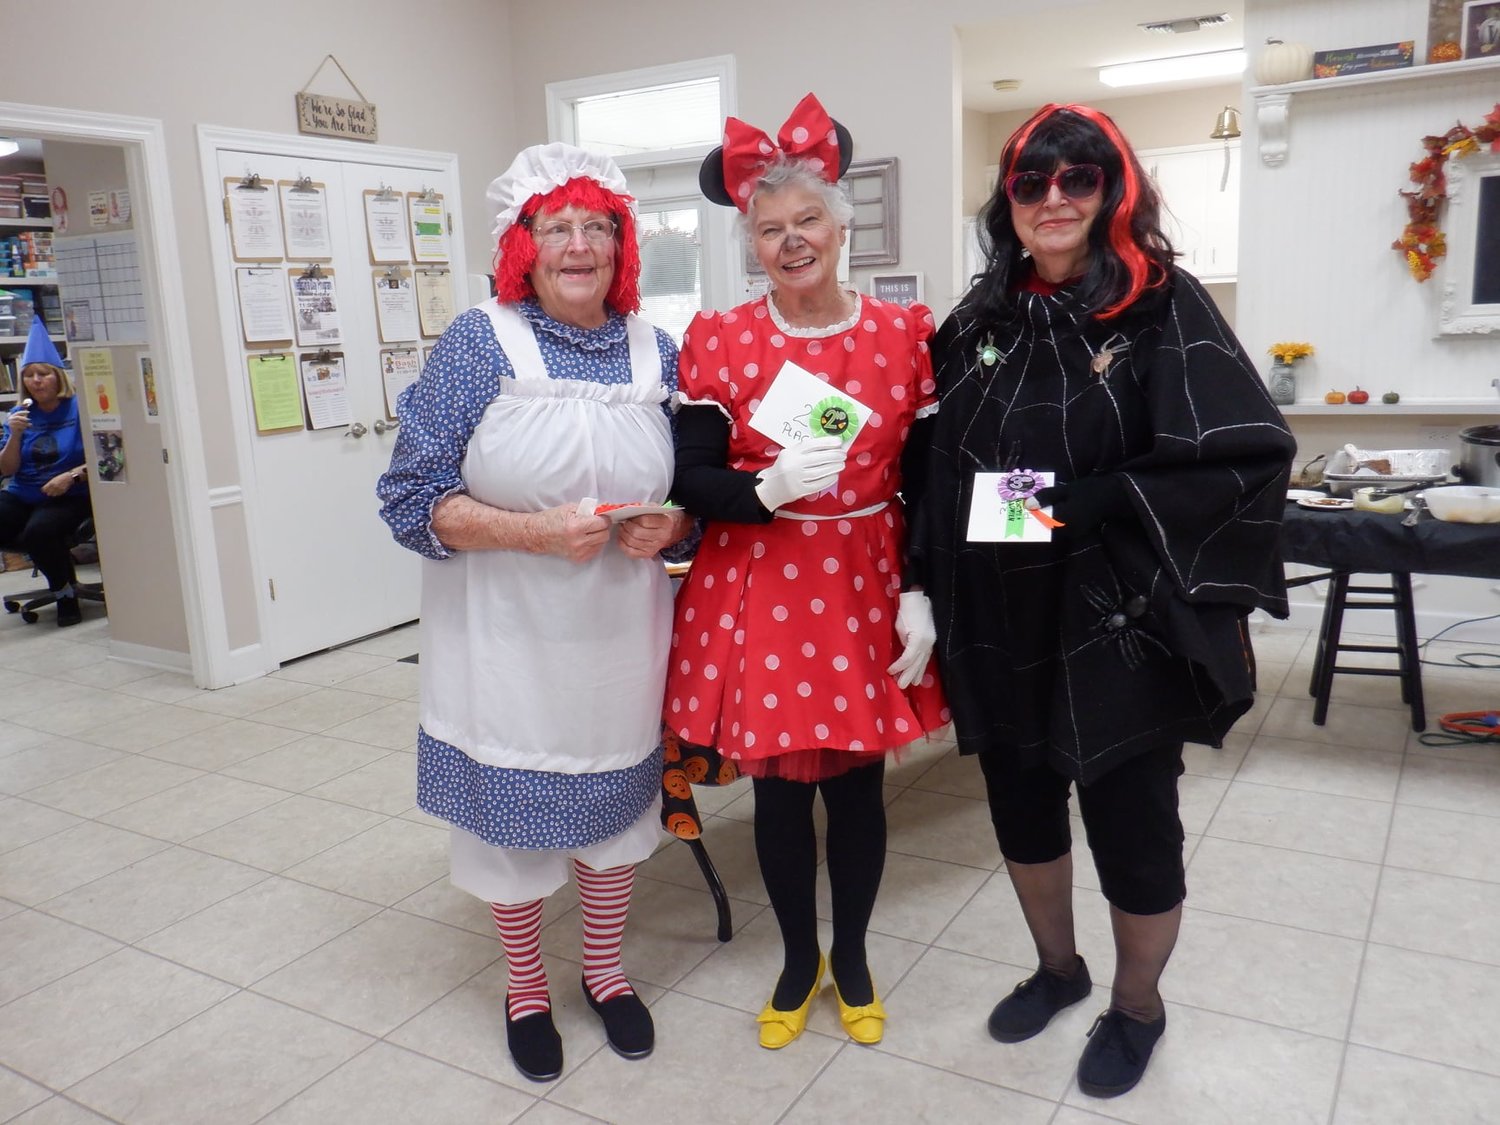 Costume contest winners are, from left, Raggedy Ann, Reta Dressler, first place; Minnie Mouse, Martha Dunn, second; and Spider Lady, Sandy Stillman, third.